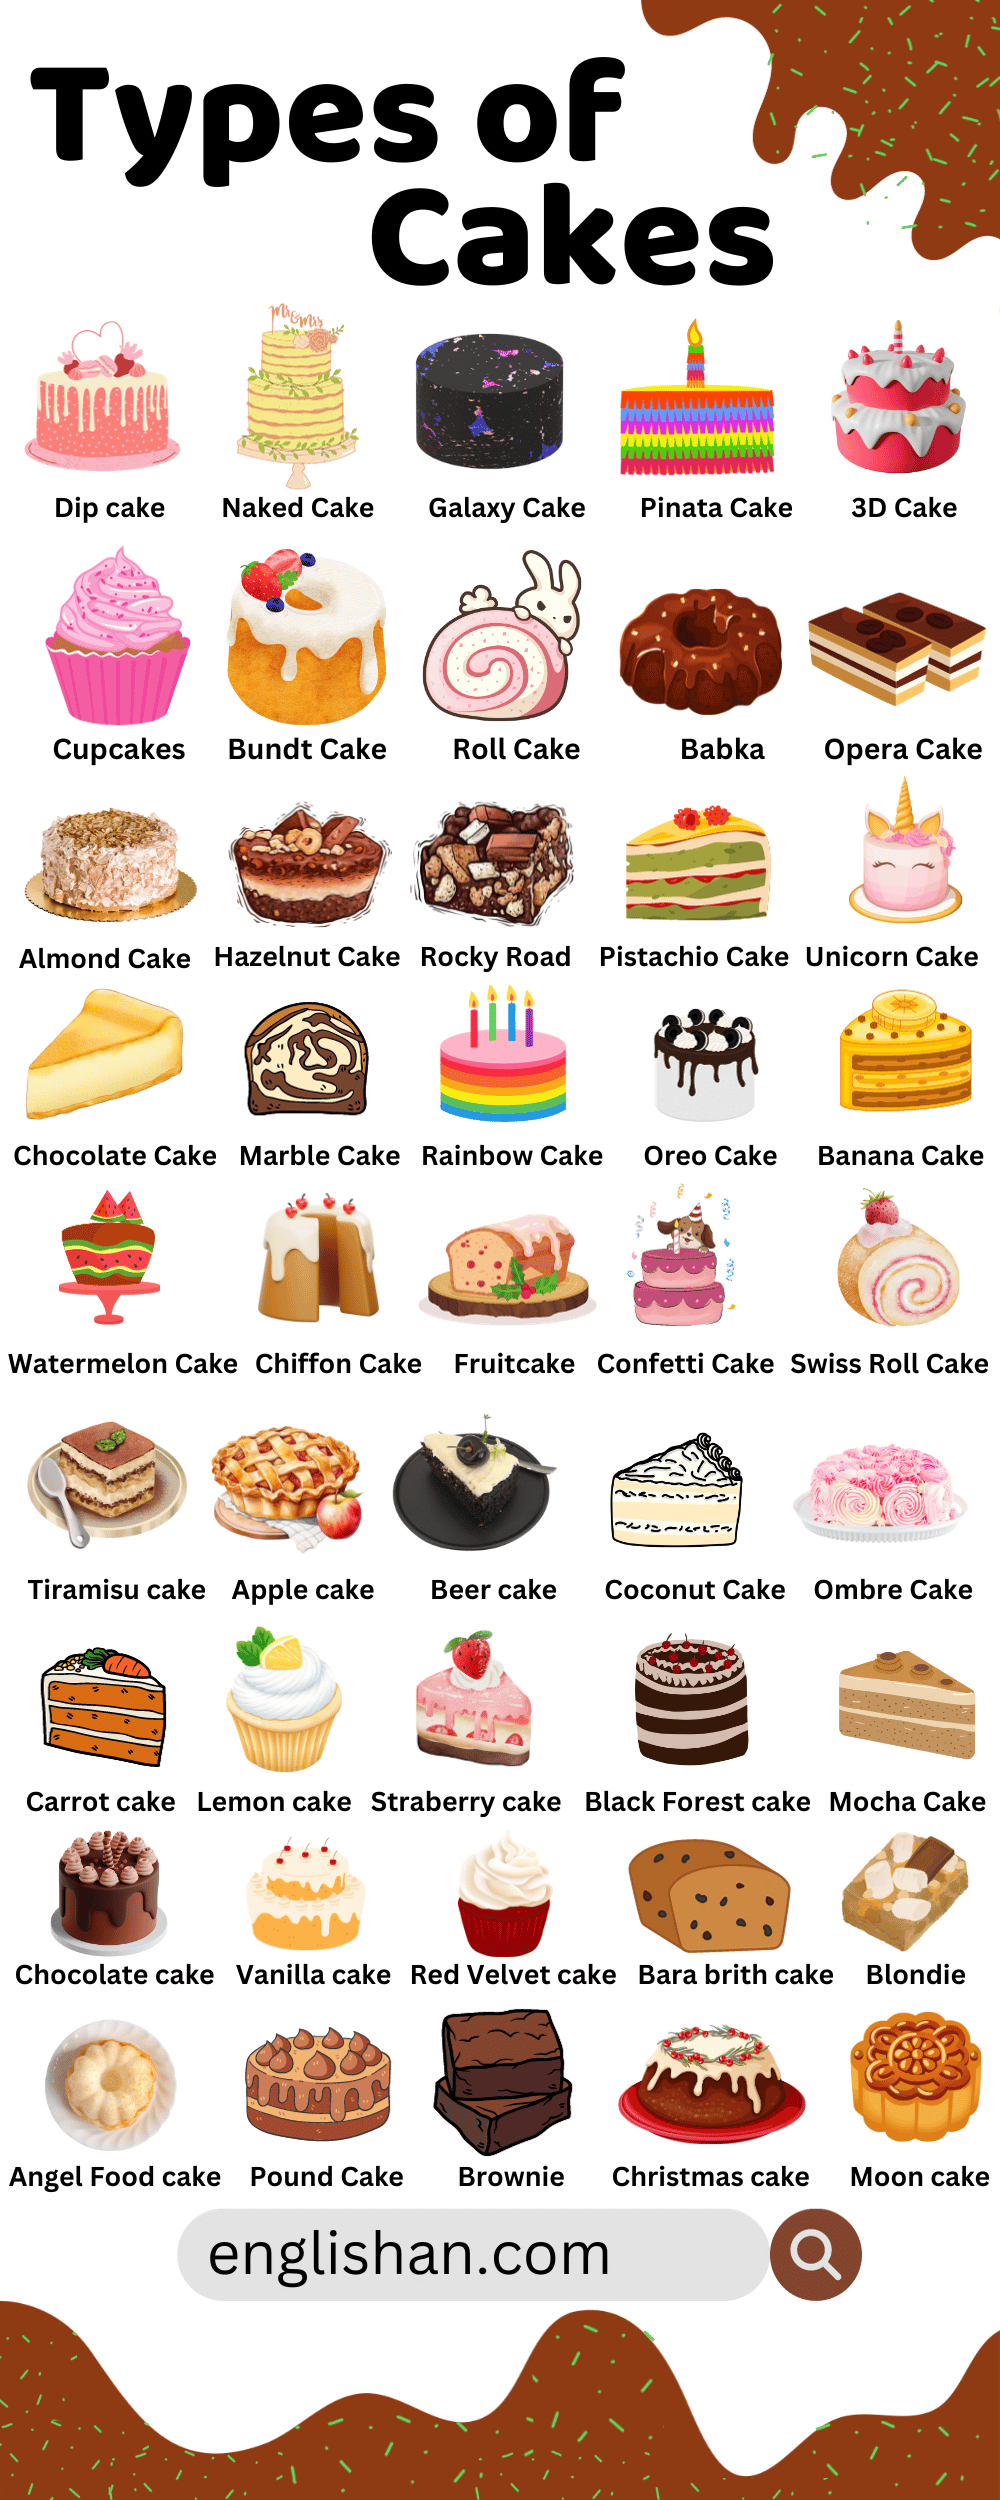 Our Favorite Types of Cakes | The Table by Harry & David